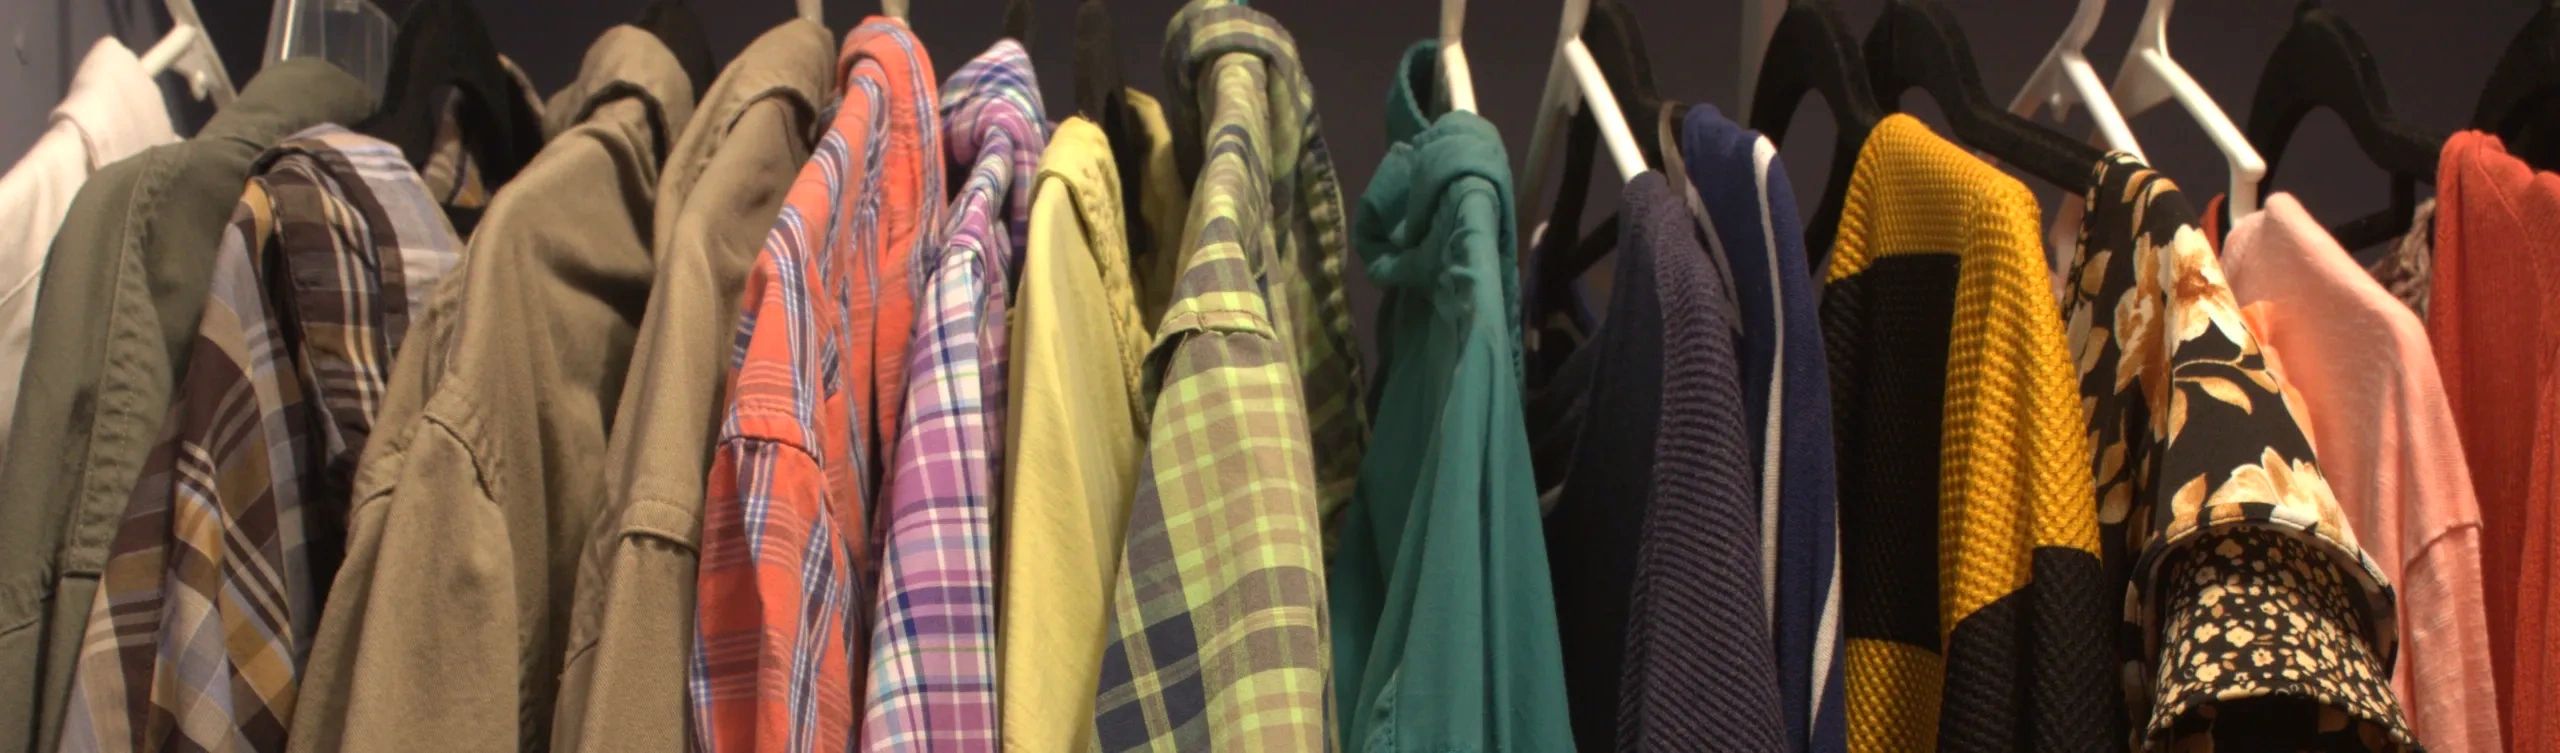 A rack of colorful clothing